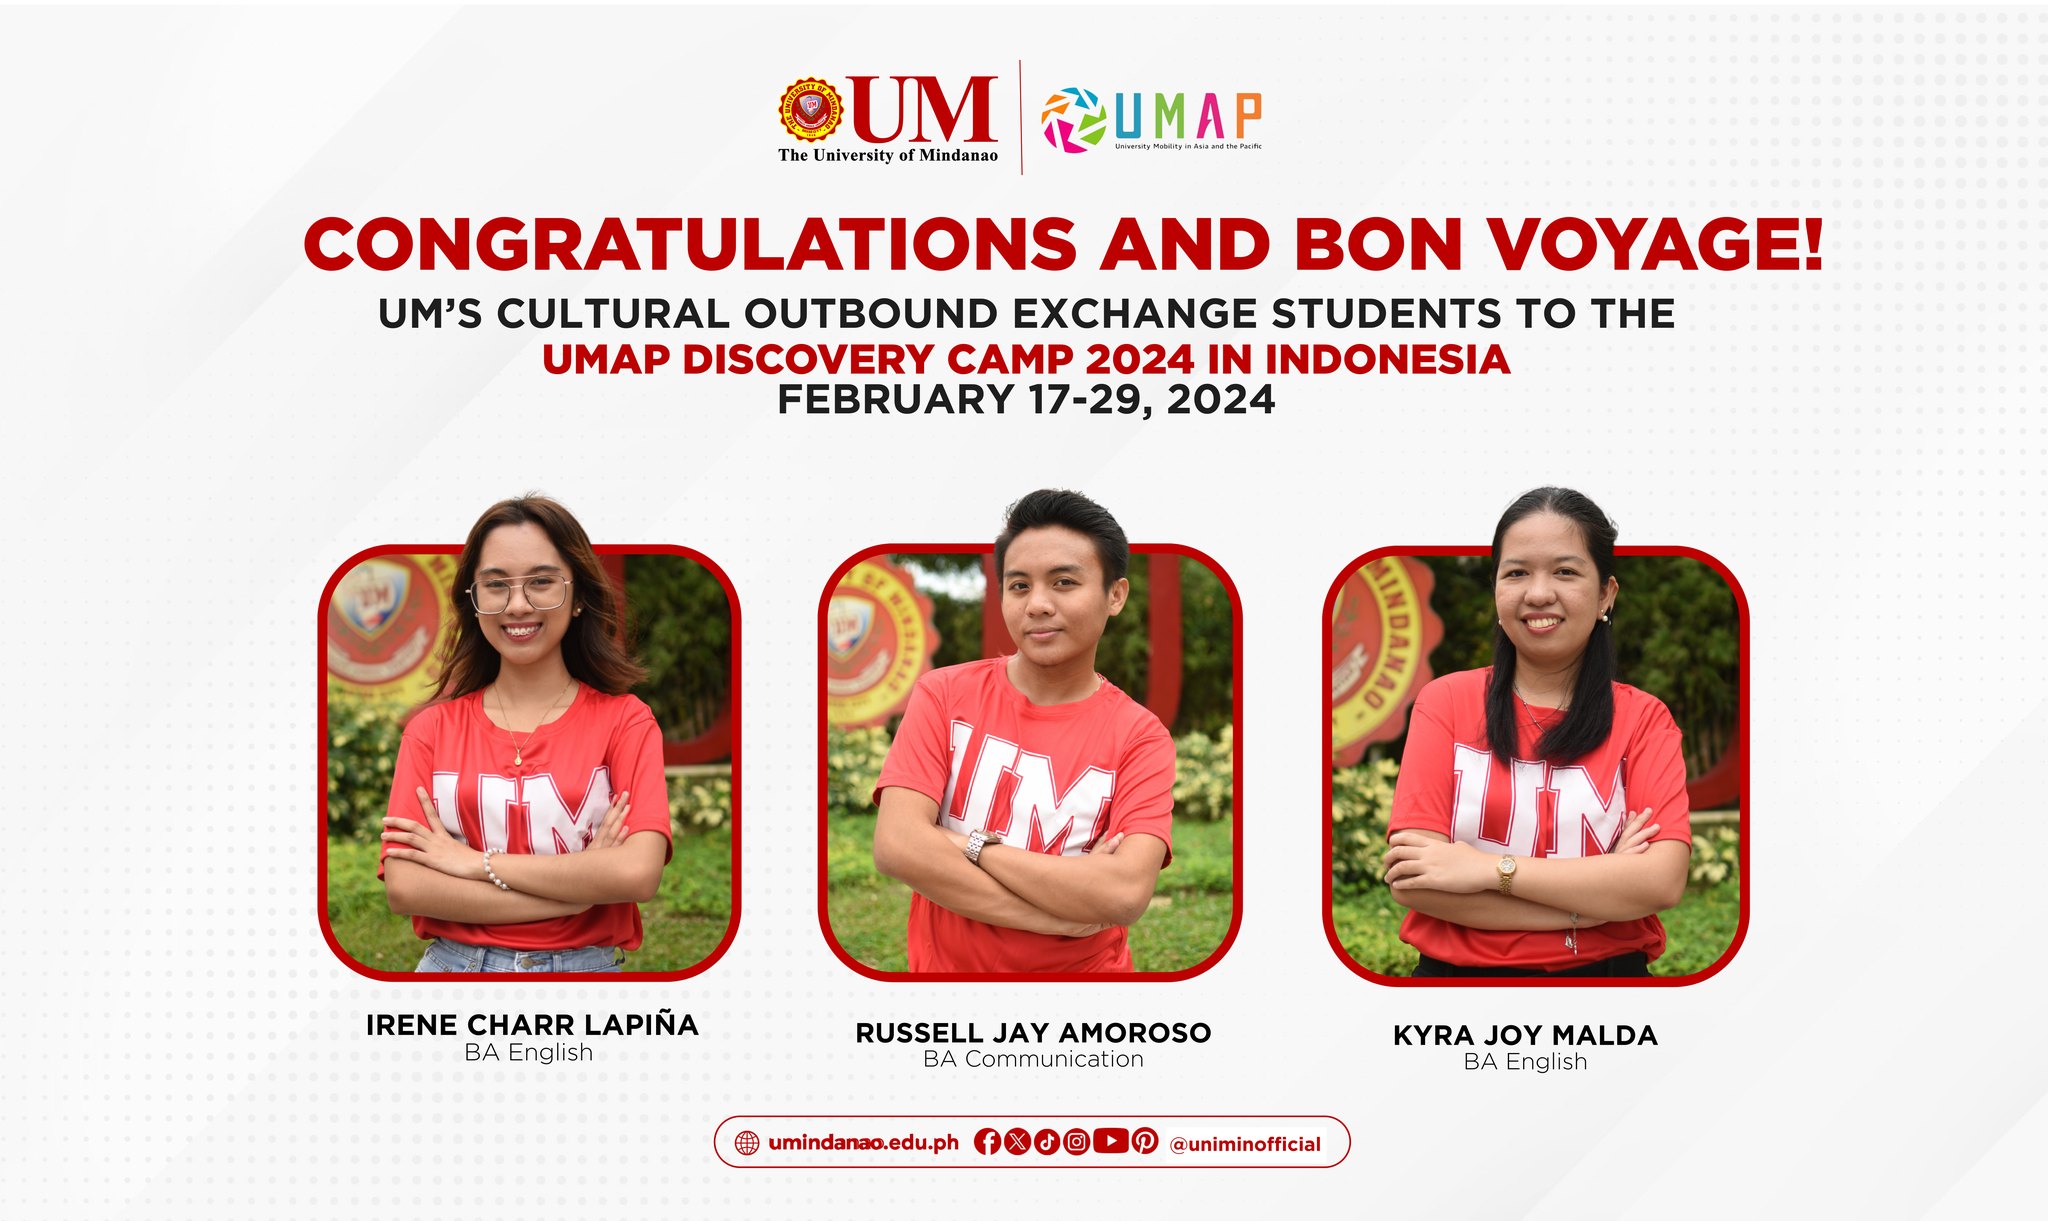 3 UMians represent university in UMAP Discovery Camp in Indonesia